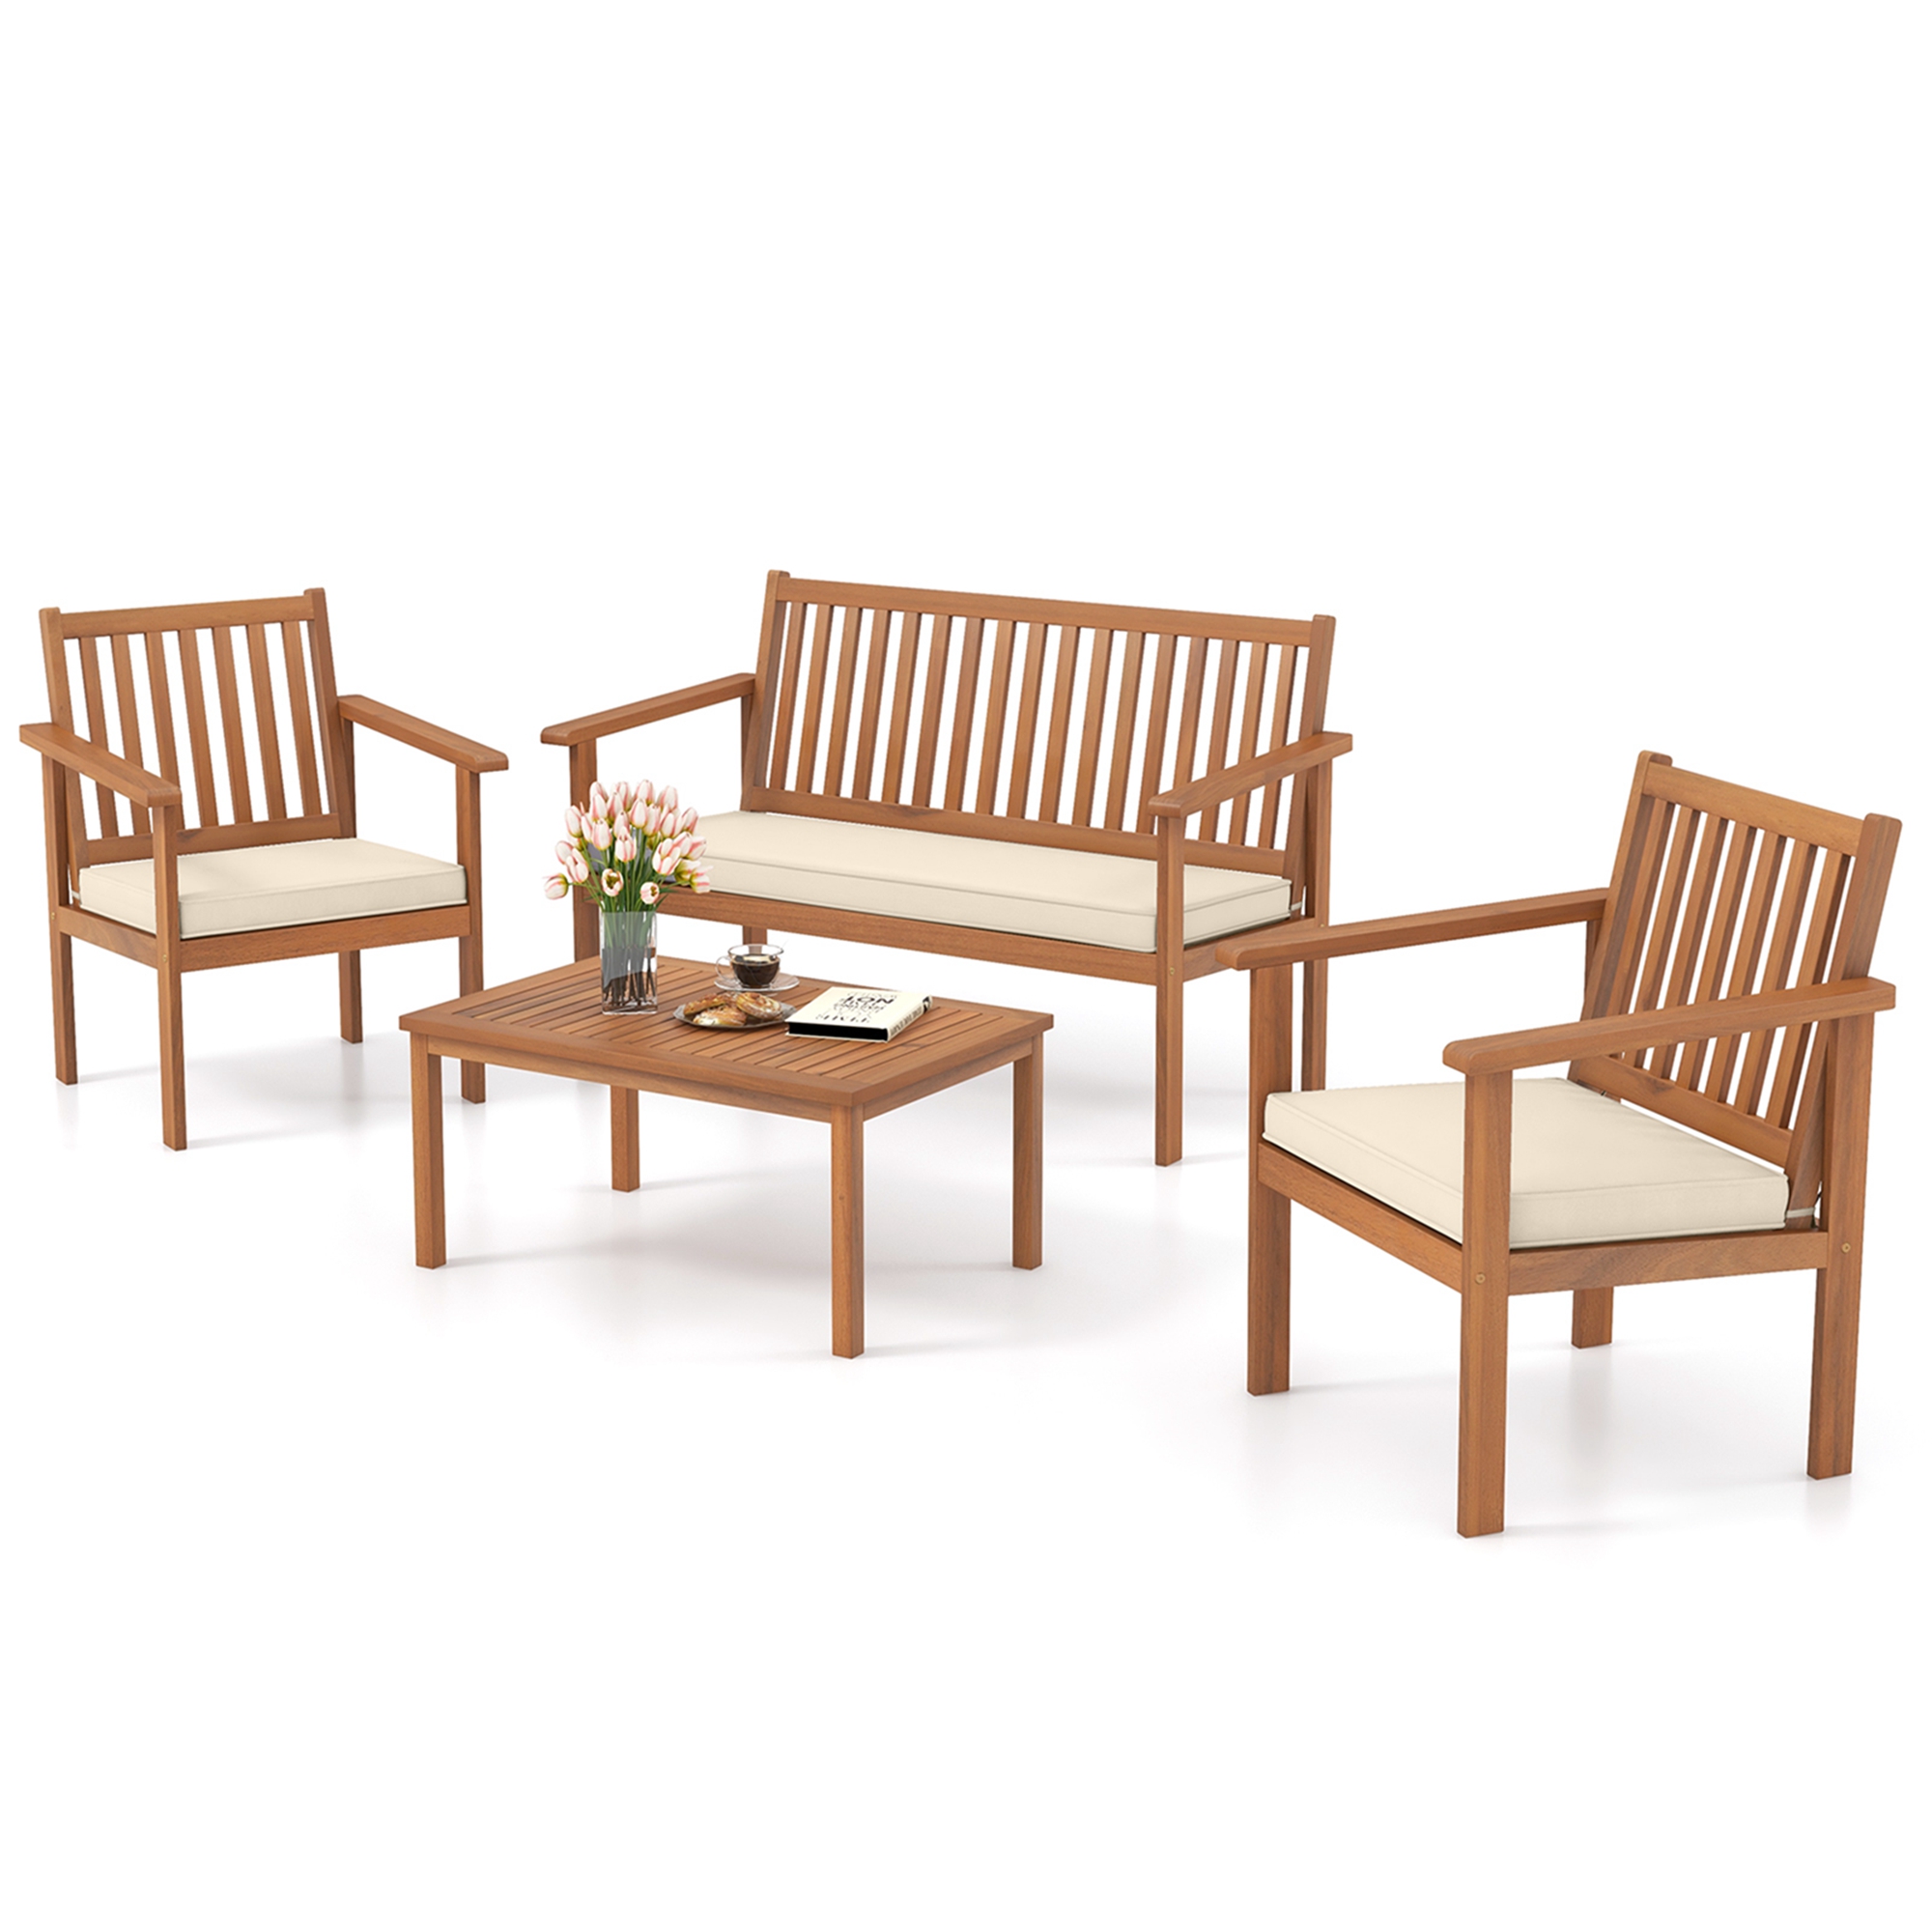 Costway 4 PCS Patio Wood Furniture Set with Loveseat, 2 Chairs & Coffee Table for Porch White - image 2 of 10